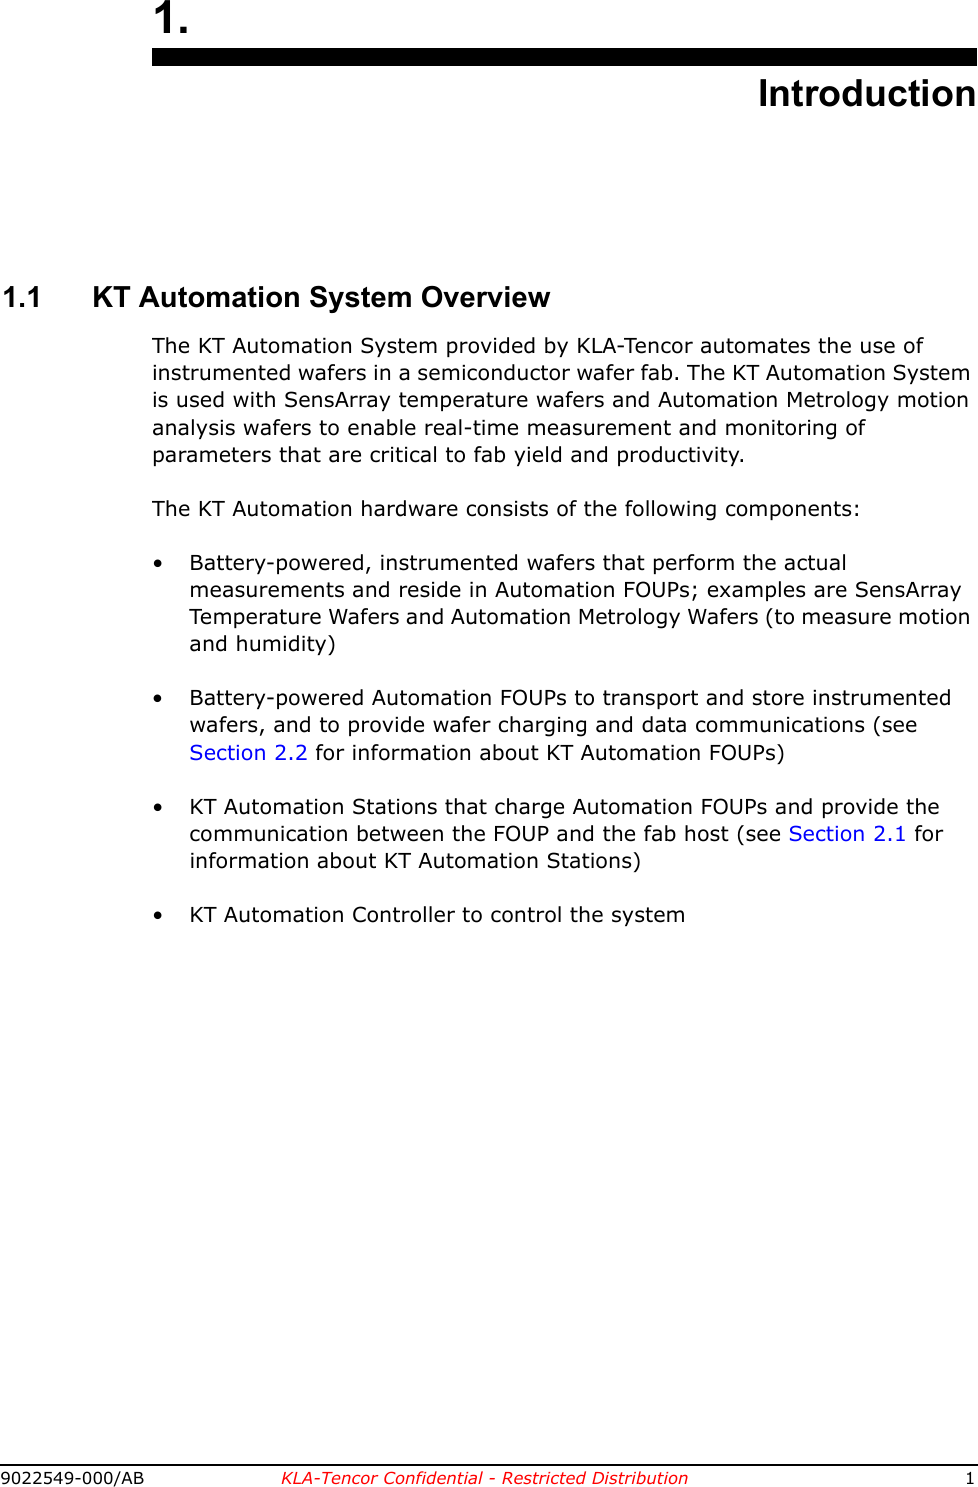 9022549-000/AB KLA-Tencor Confidential - Restricted Distribution 11.Introduction1.1 KT Automation System OverviewThe KT Automation System provided by KLA-Tencor automates the use of instrumented wafers in a semiconductor wafer fab. The KT Automation System is used with SensArray temperature wafers and Automation Metrology motion analysis wafers to enable real-time measurement and monitoring of parameters that are critical to fab yield and productivity.The KT Automation hardware consists of the following components:• Battery-powered, instrumented wafers that perform the actual measurements and reside in Automation FOUPs; examples are SensArray Temperature Wafers and Automation Metrology Wafers (to measure motion and humidity)• Battery-powered Automation FOUPs to transport and store instrumented wafers, and to provide wafer charging and data communications (see Section 2.2 for information about KT Automation FOUPs)• KT Automation Stations that charge Automation FOUPs and provide the communication between the FOUP and the fab host (see Section 2.1 for information about KT Automation Stations)• KT Automation Controller to control the system